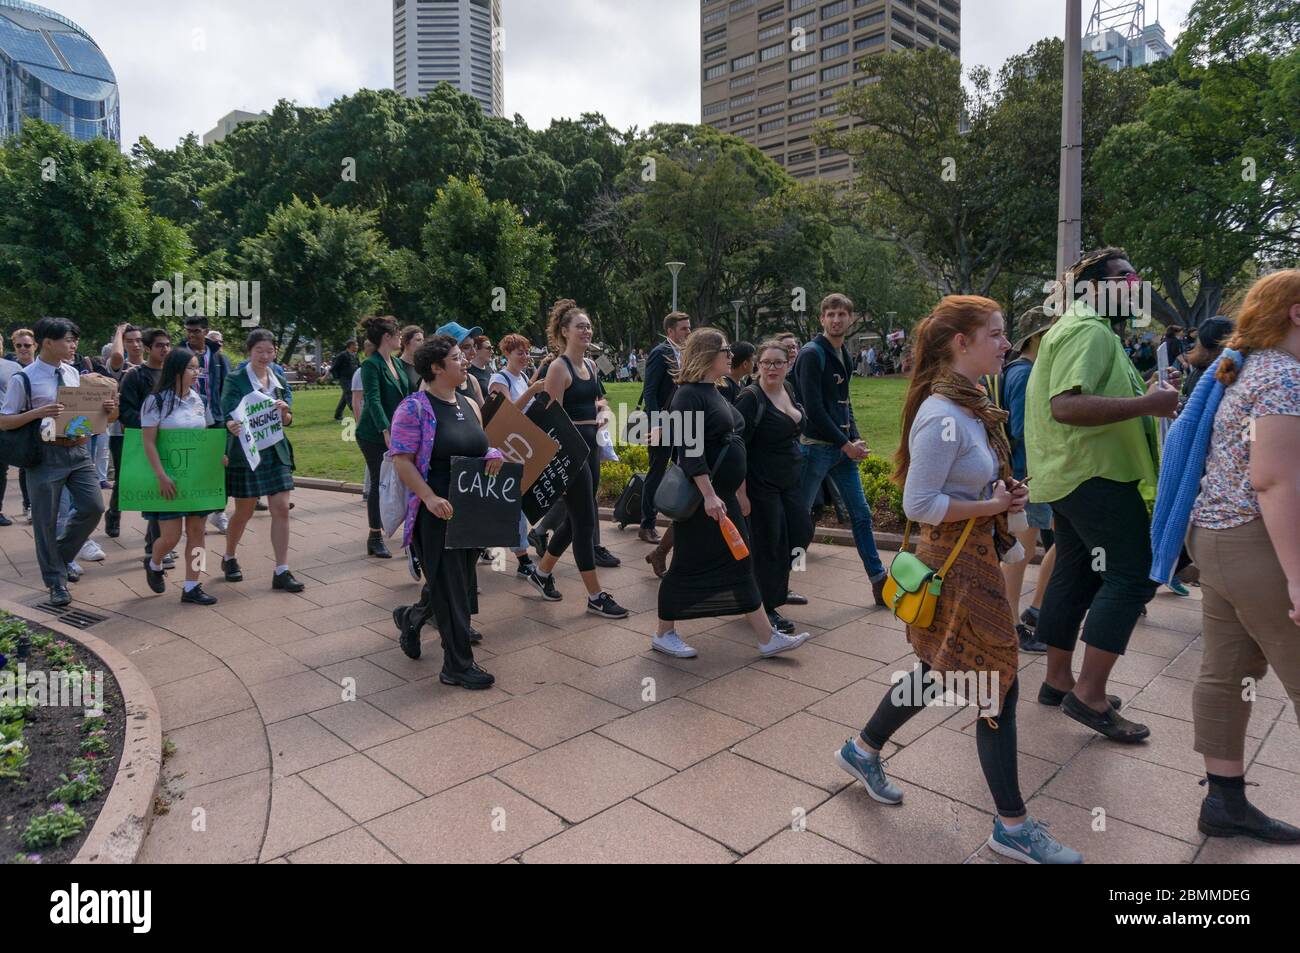 Sydney, Australia - September 20, 2019: People with banners and placards going to protest Stock Photo